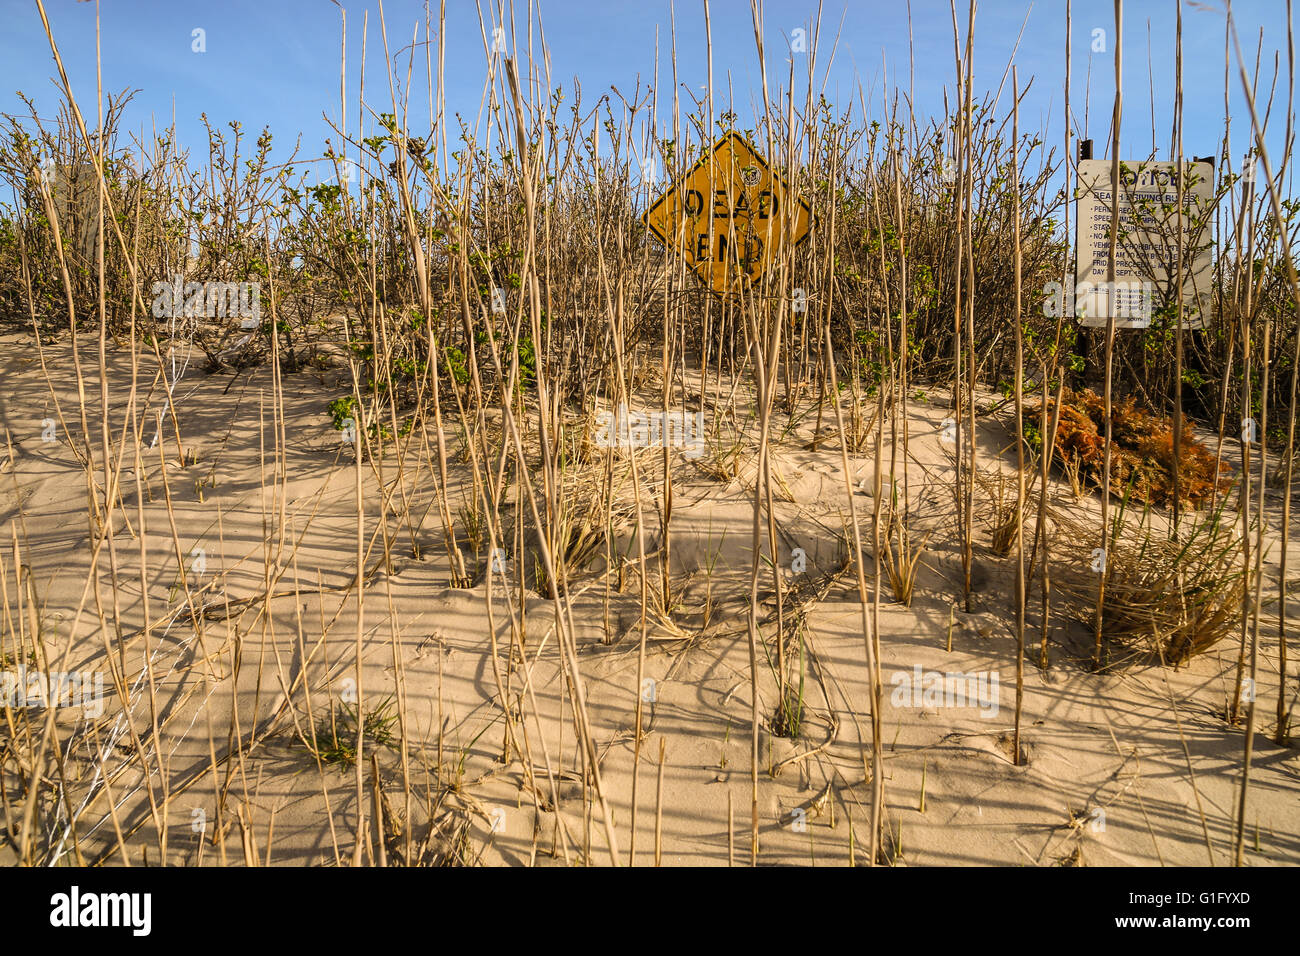 a dead end sign partially covered by beach grass, in Long island, ny Stock Photo